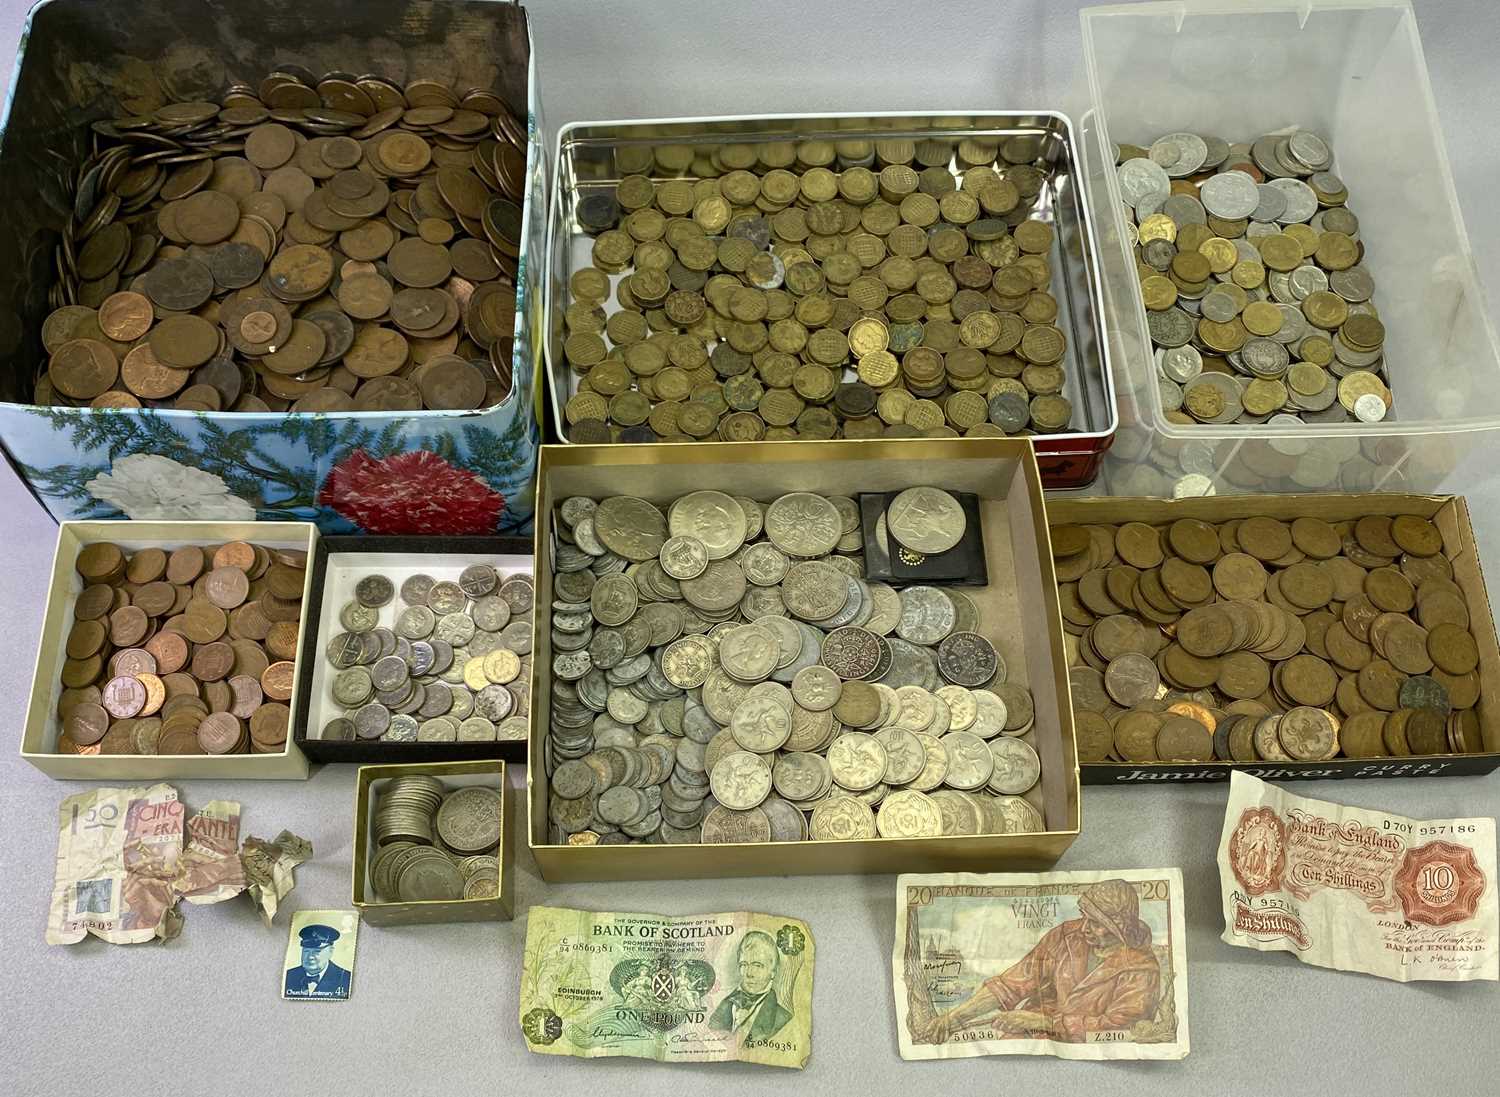 LARGE BRITISH VINTAGE COIN COLLECTION - some overseas, bank notes and current coinage to include